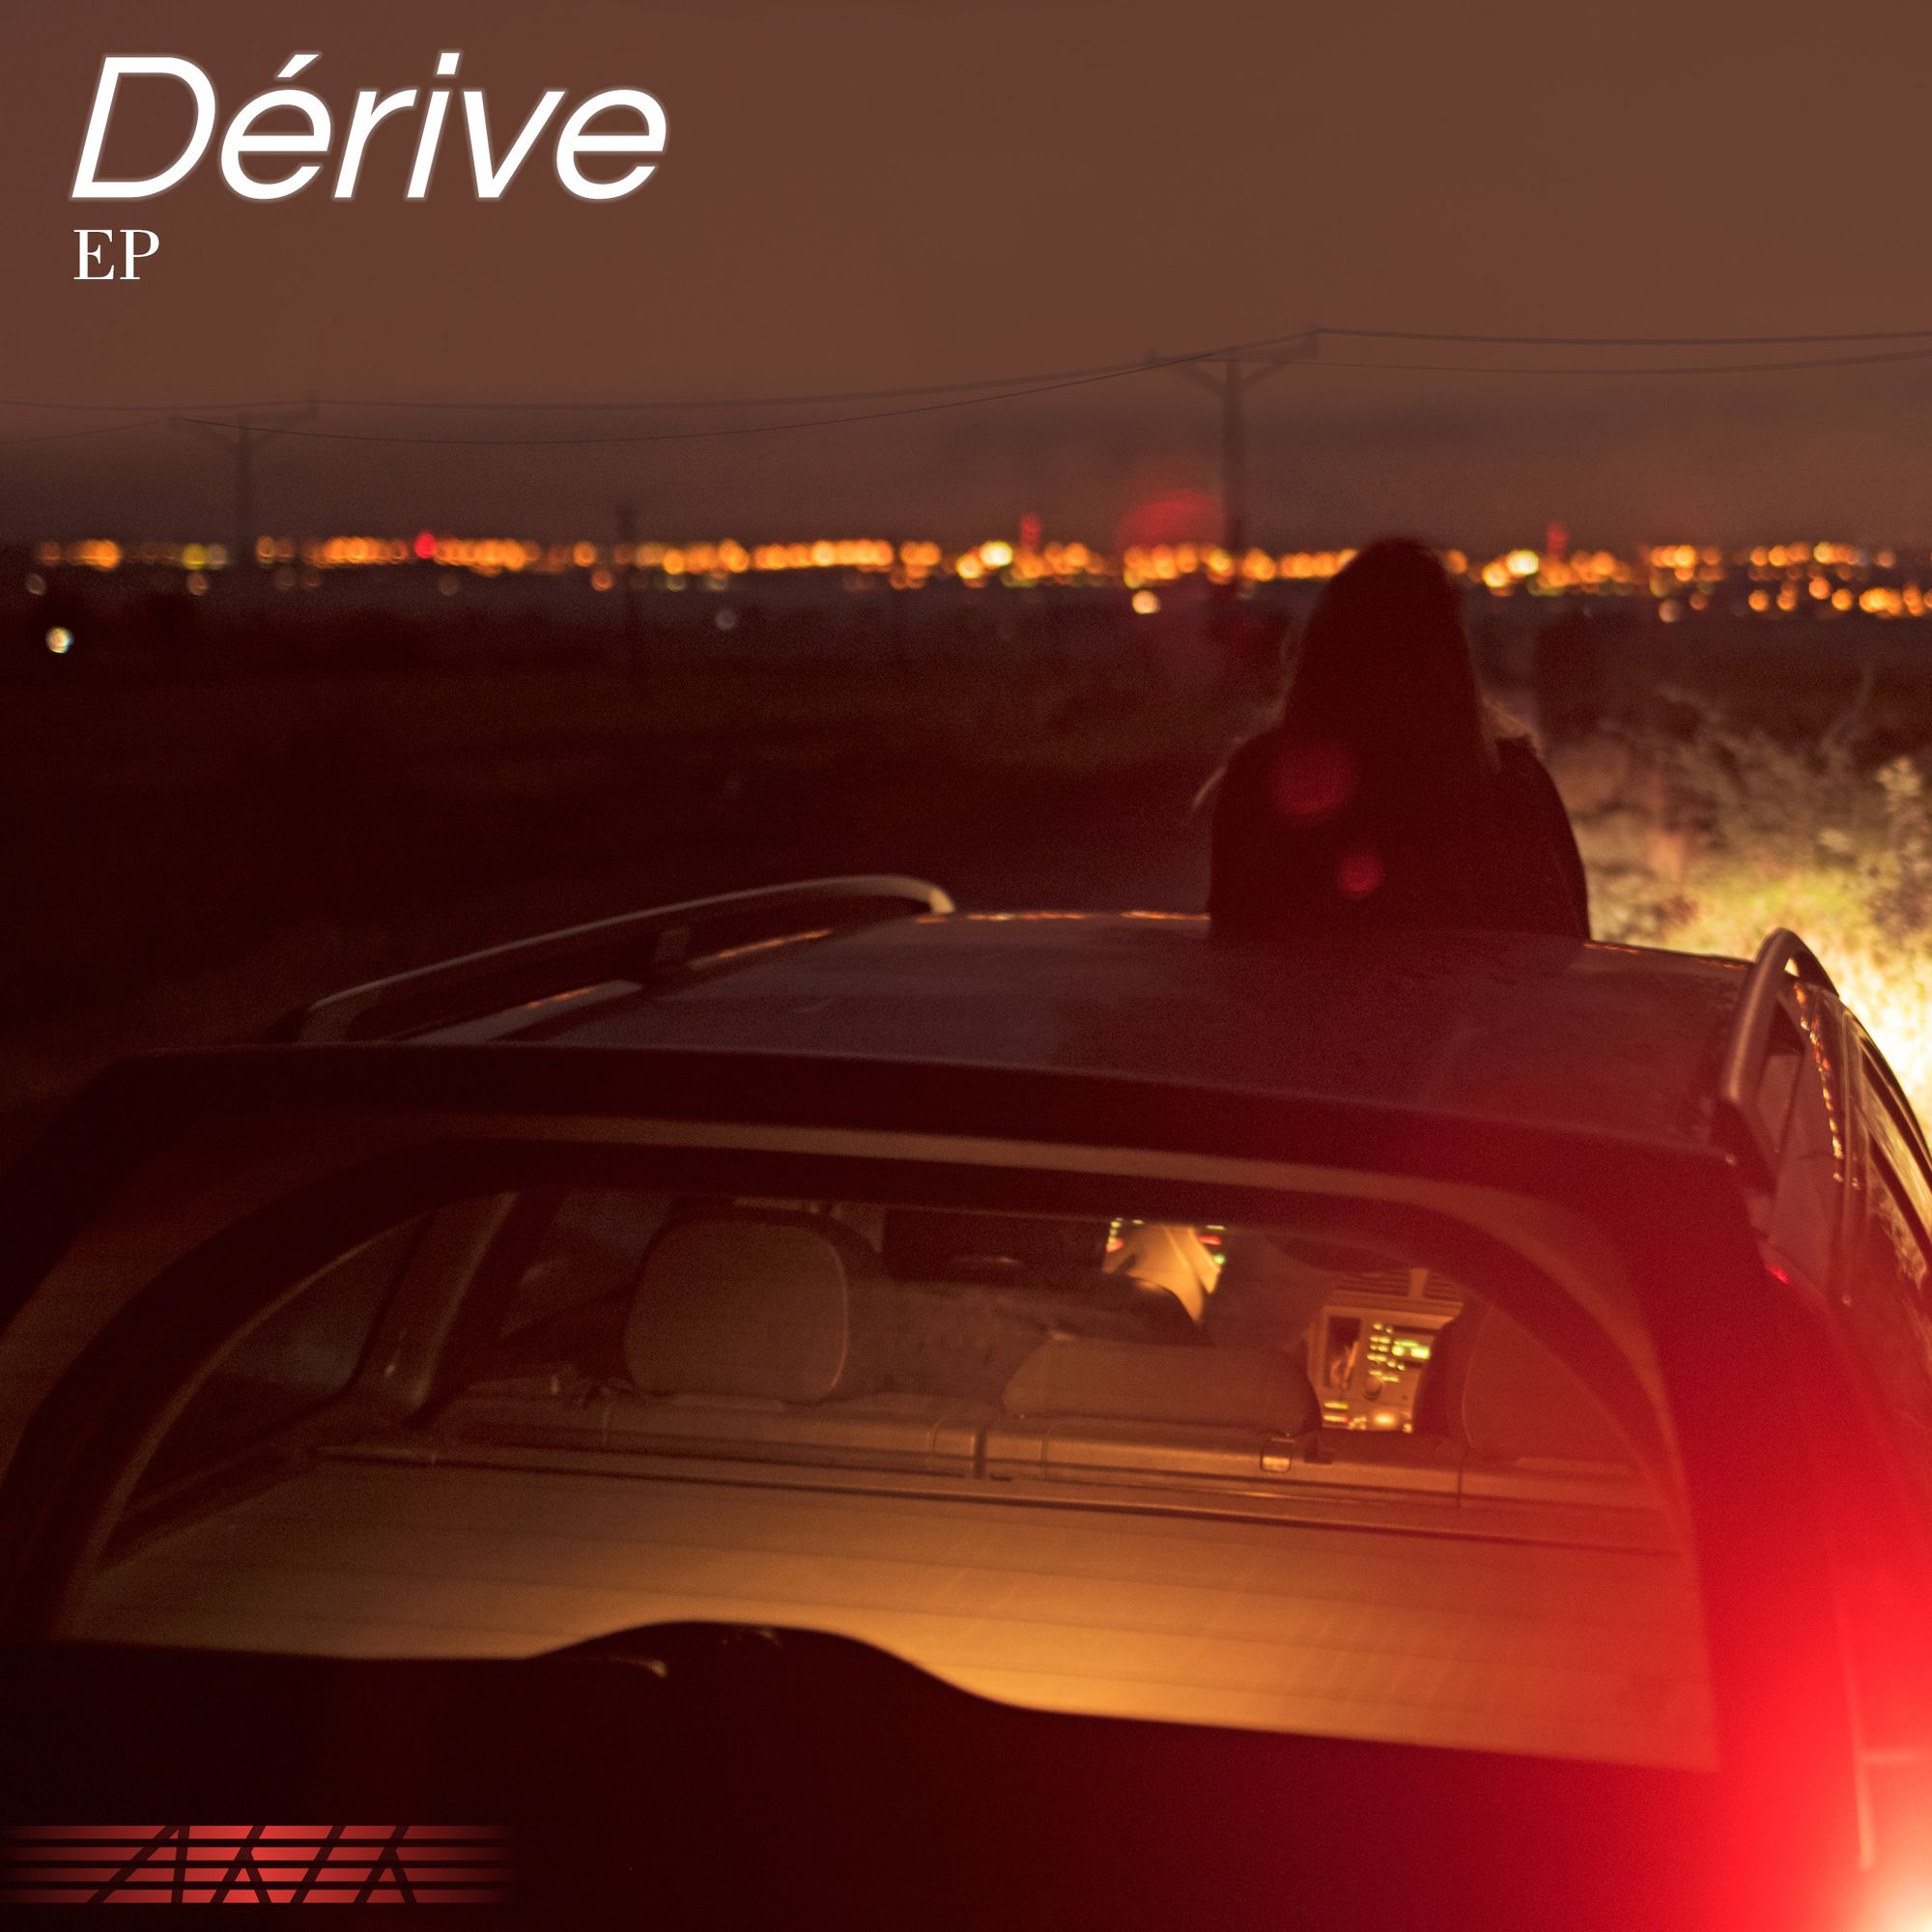 Dérive EP – available now!